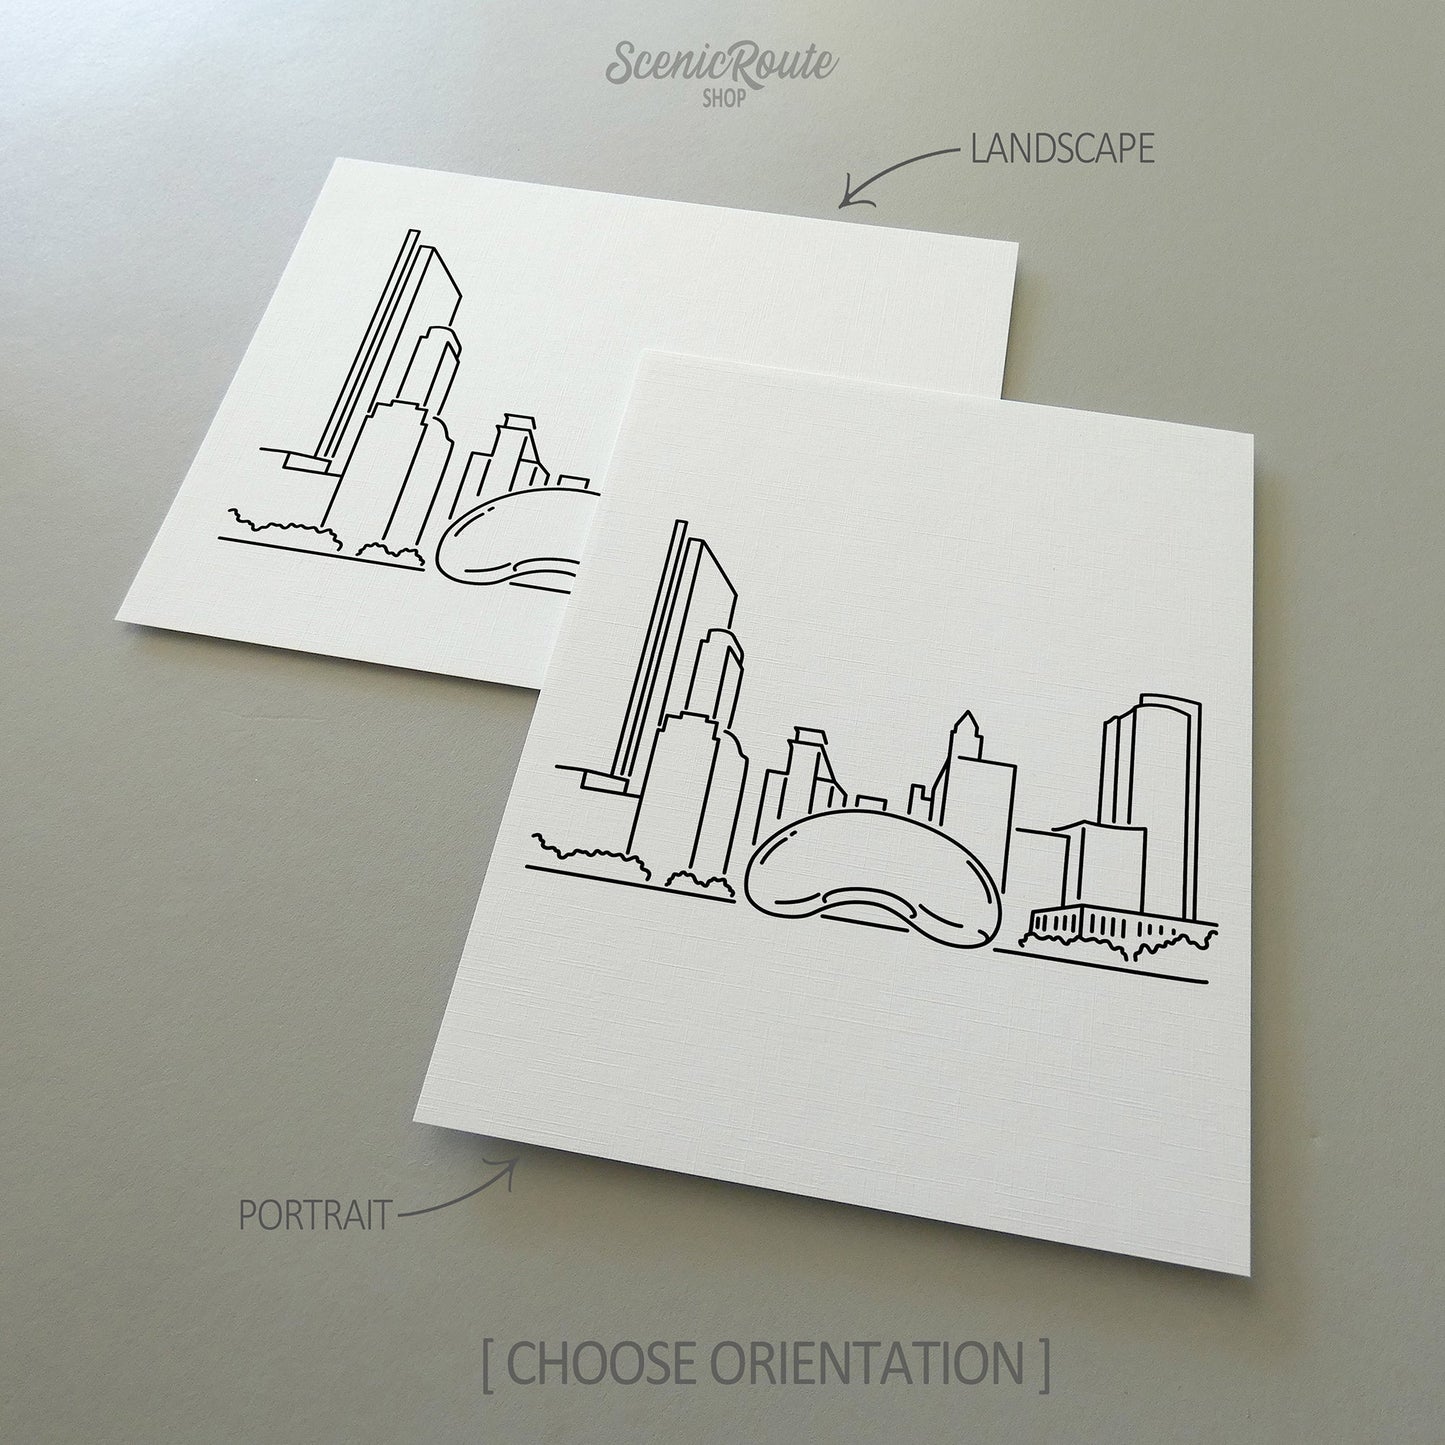 Two line art drawings of the Chicago Bean Sculpture on white linen paper with a gray background.  The pieces are shown in portrait and landscape orientation for the available art print options.